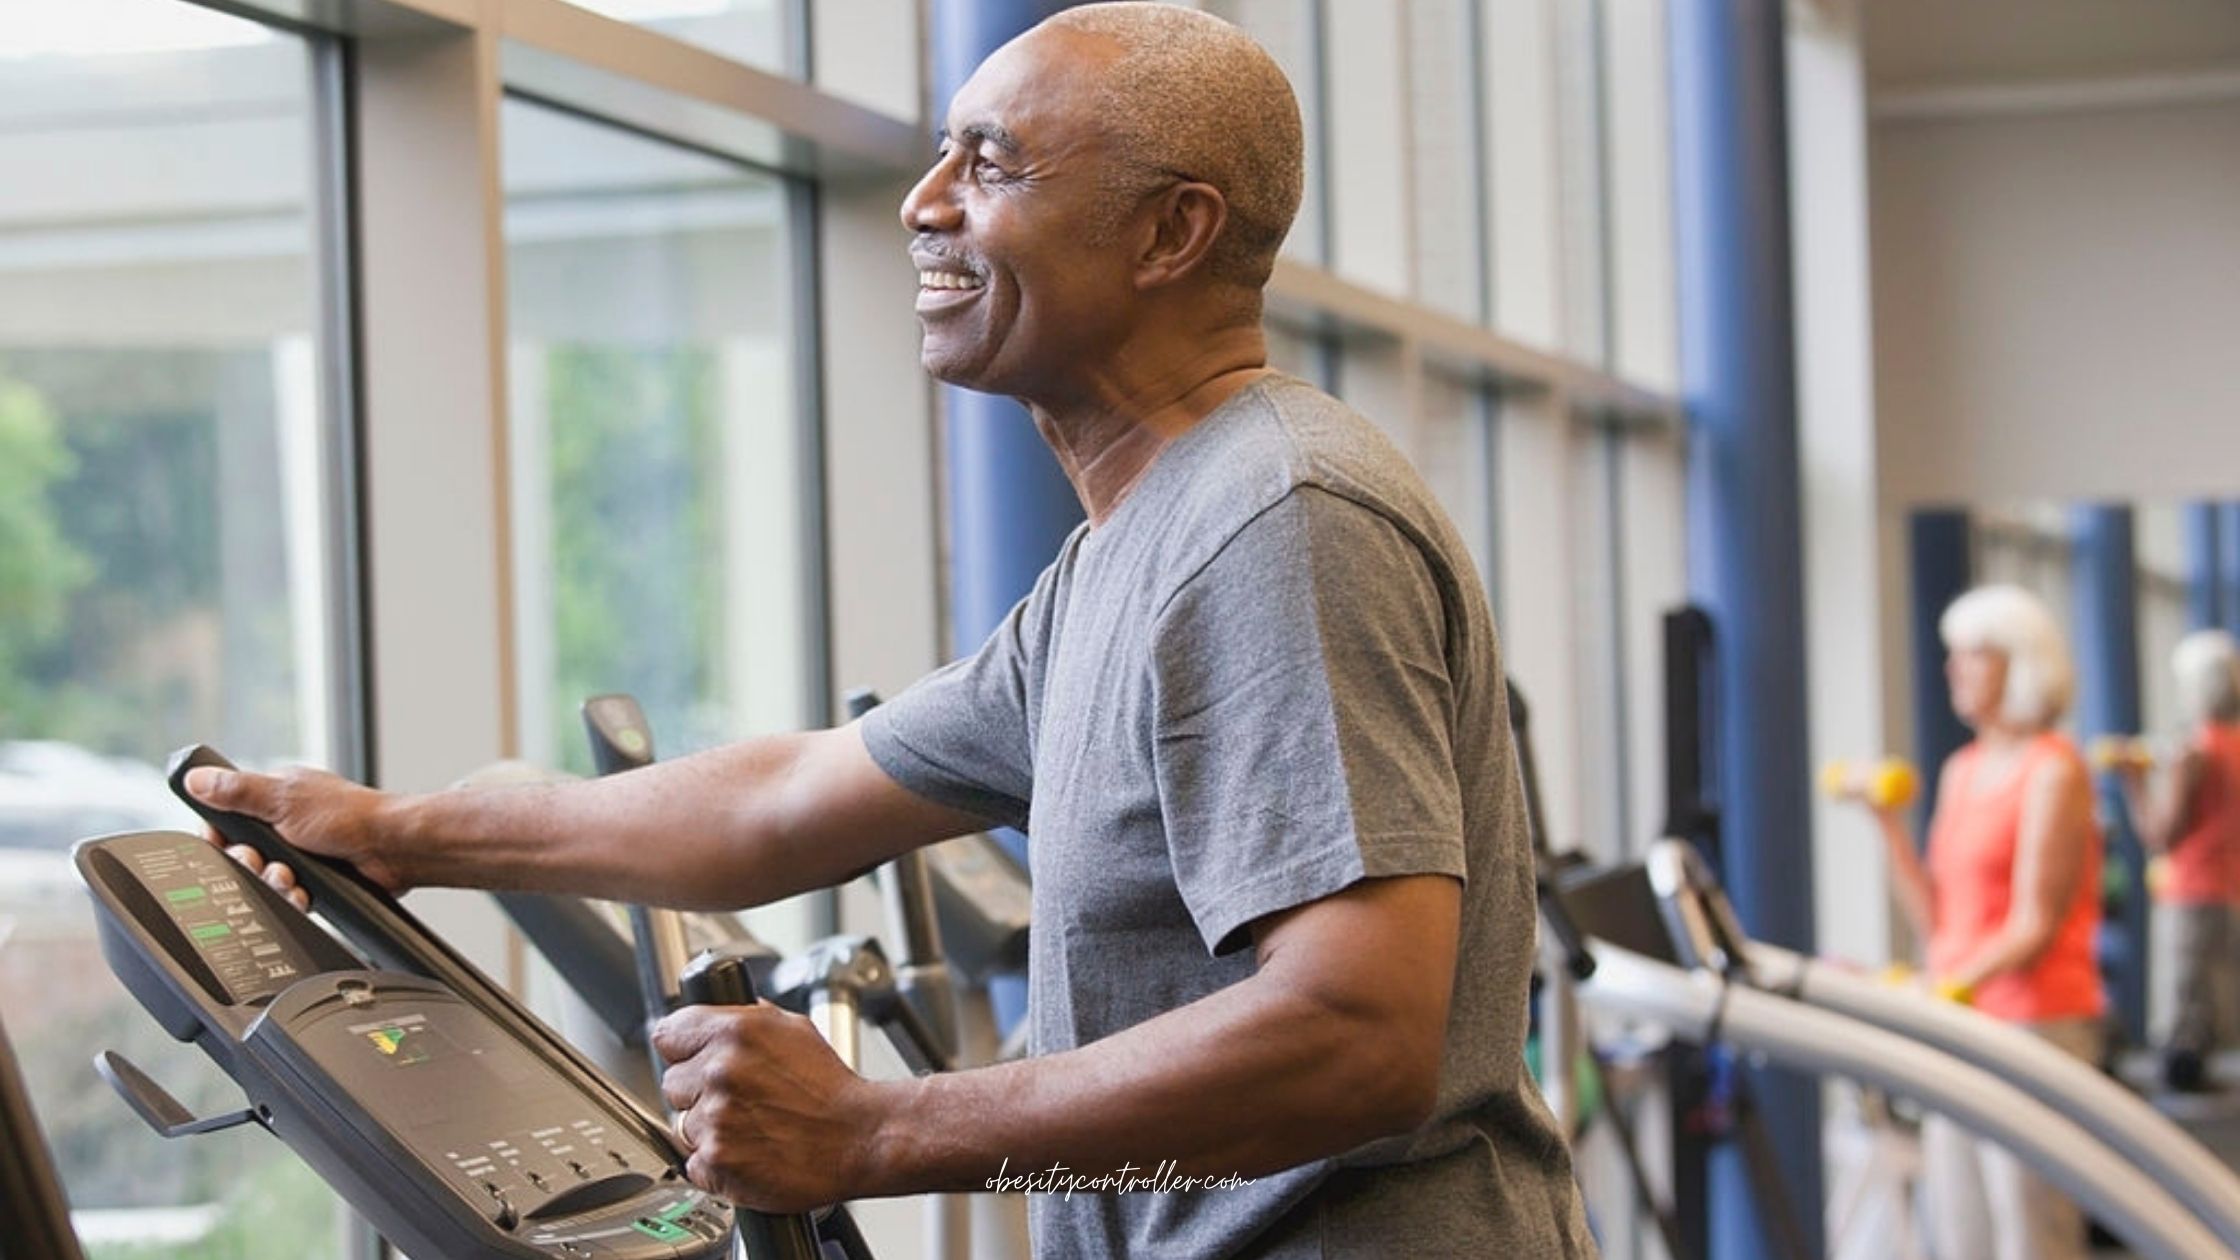 Exercise Improves Health In Adults